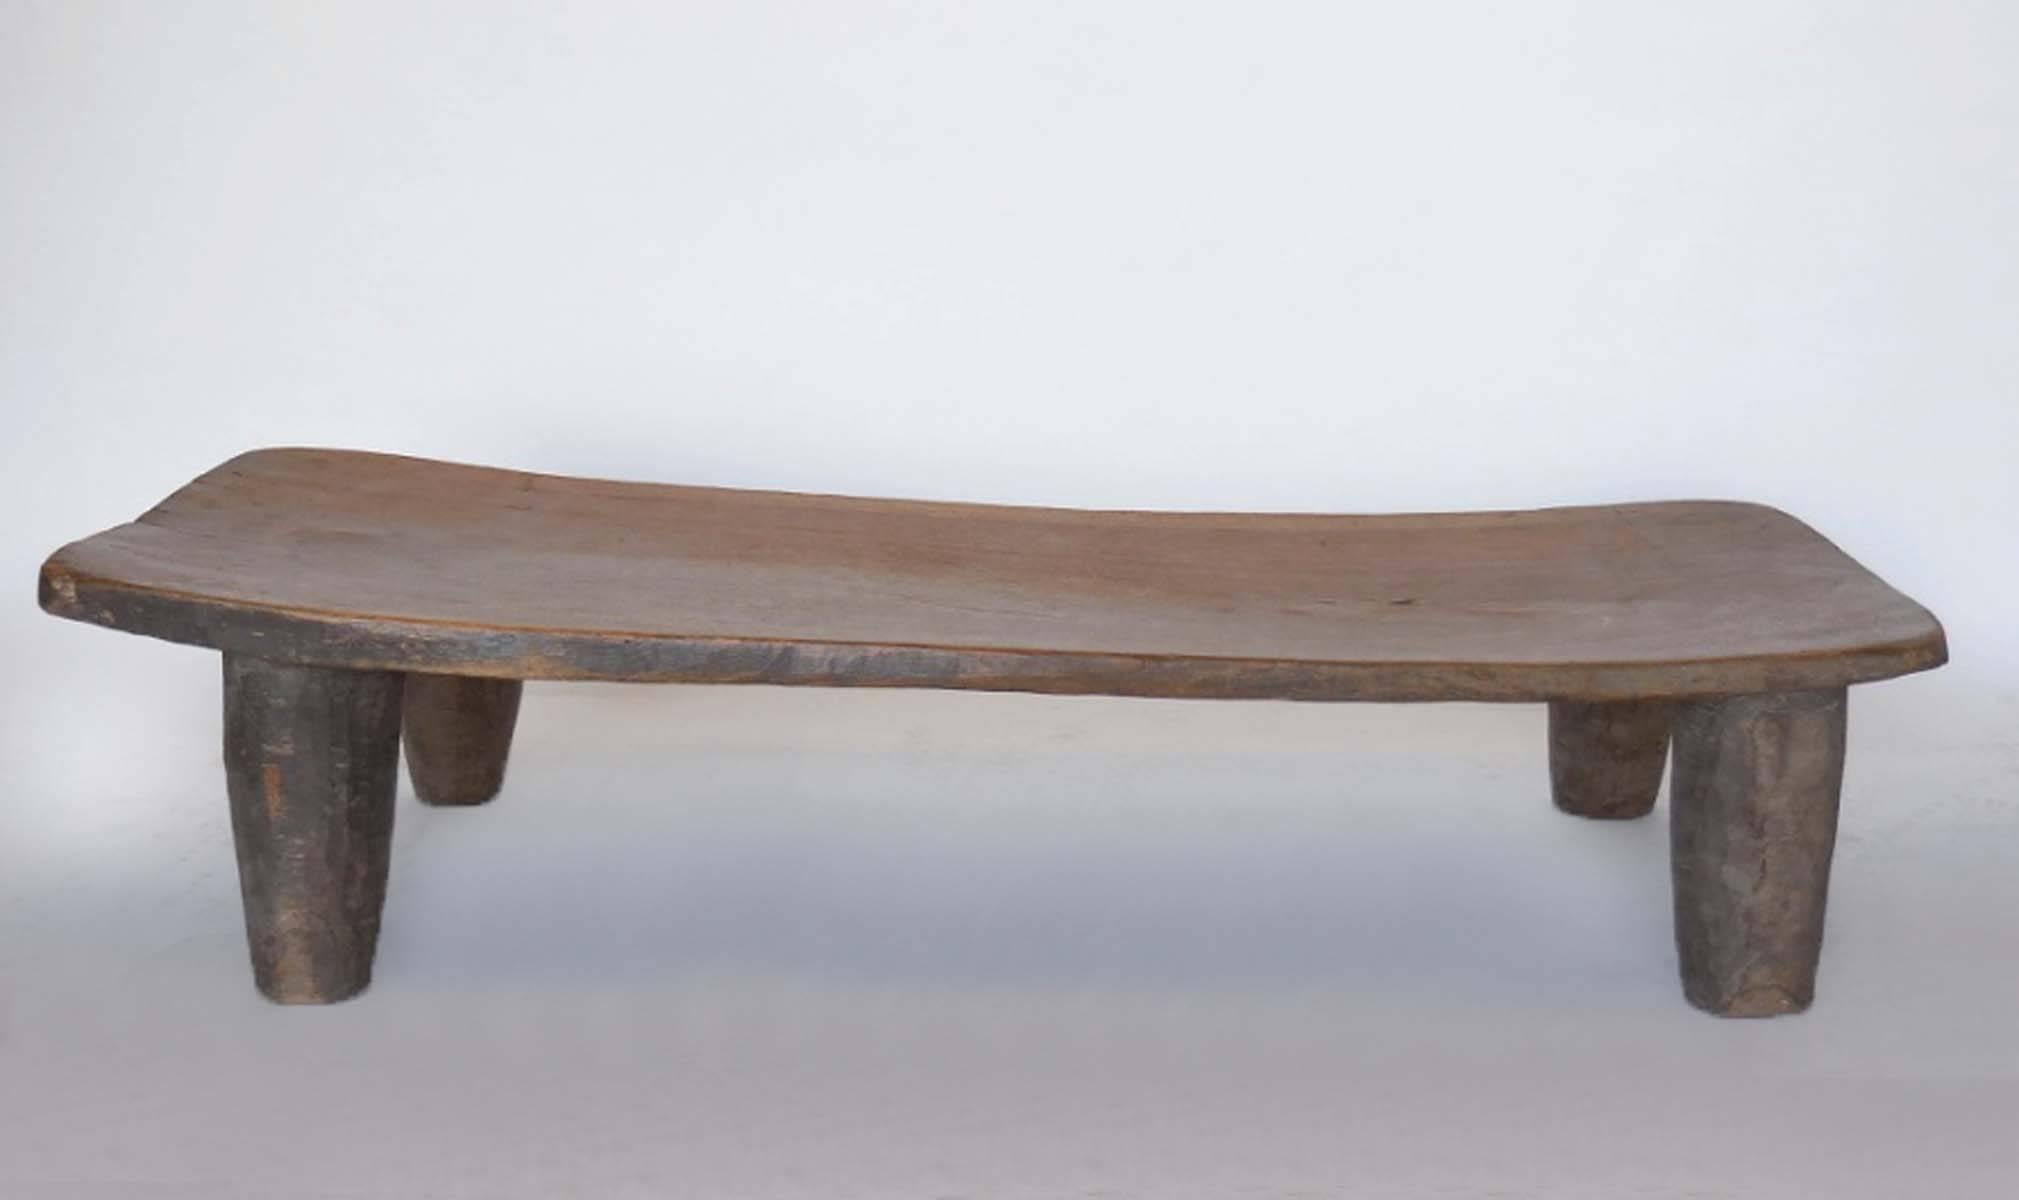 Nigerian Antique African Nupe Child's Bed, Coffee Table or Bench